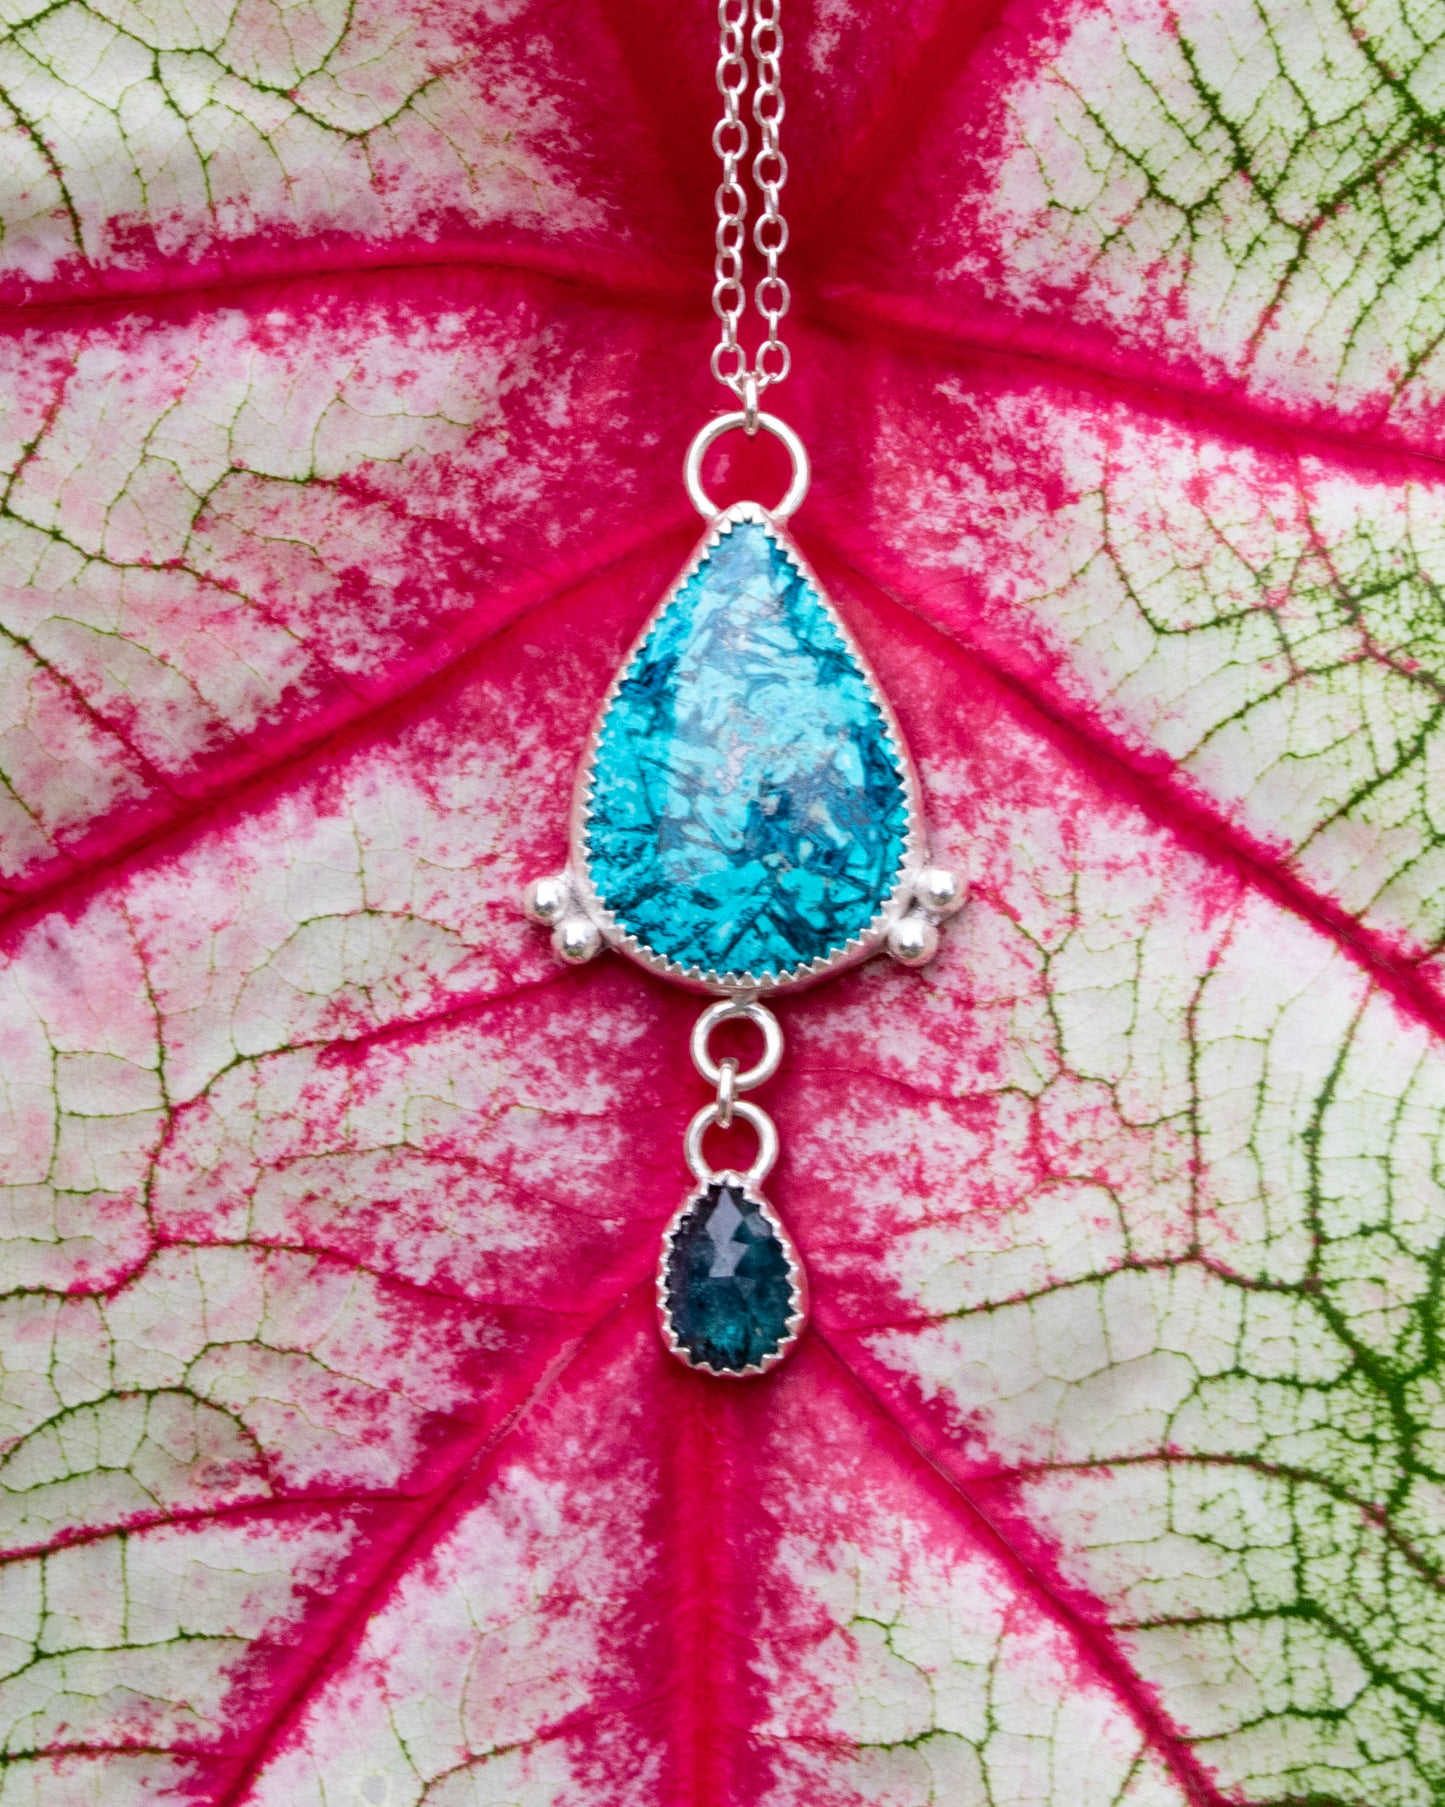 sterling silver necklace with teardrop Chrysocolla with light and dark teal blue striation pattern with two silver beads at the bottom corneres of stone. 3 jumprings connect a small teal moss kyanite hangs from the bottom. Necklace is in front of red veins on white and green leaf 